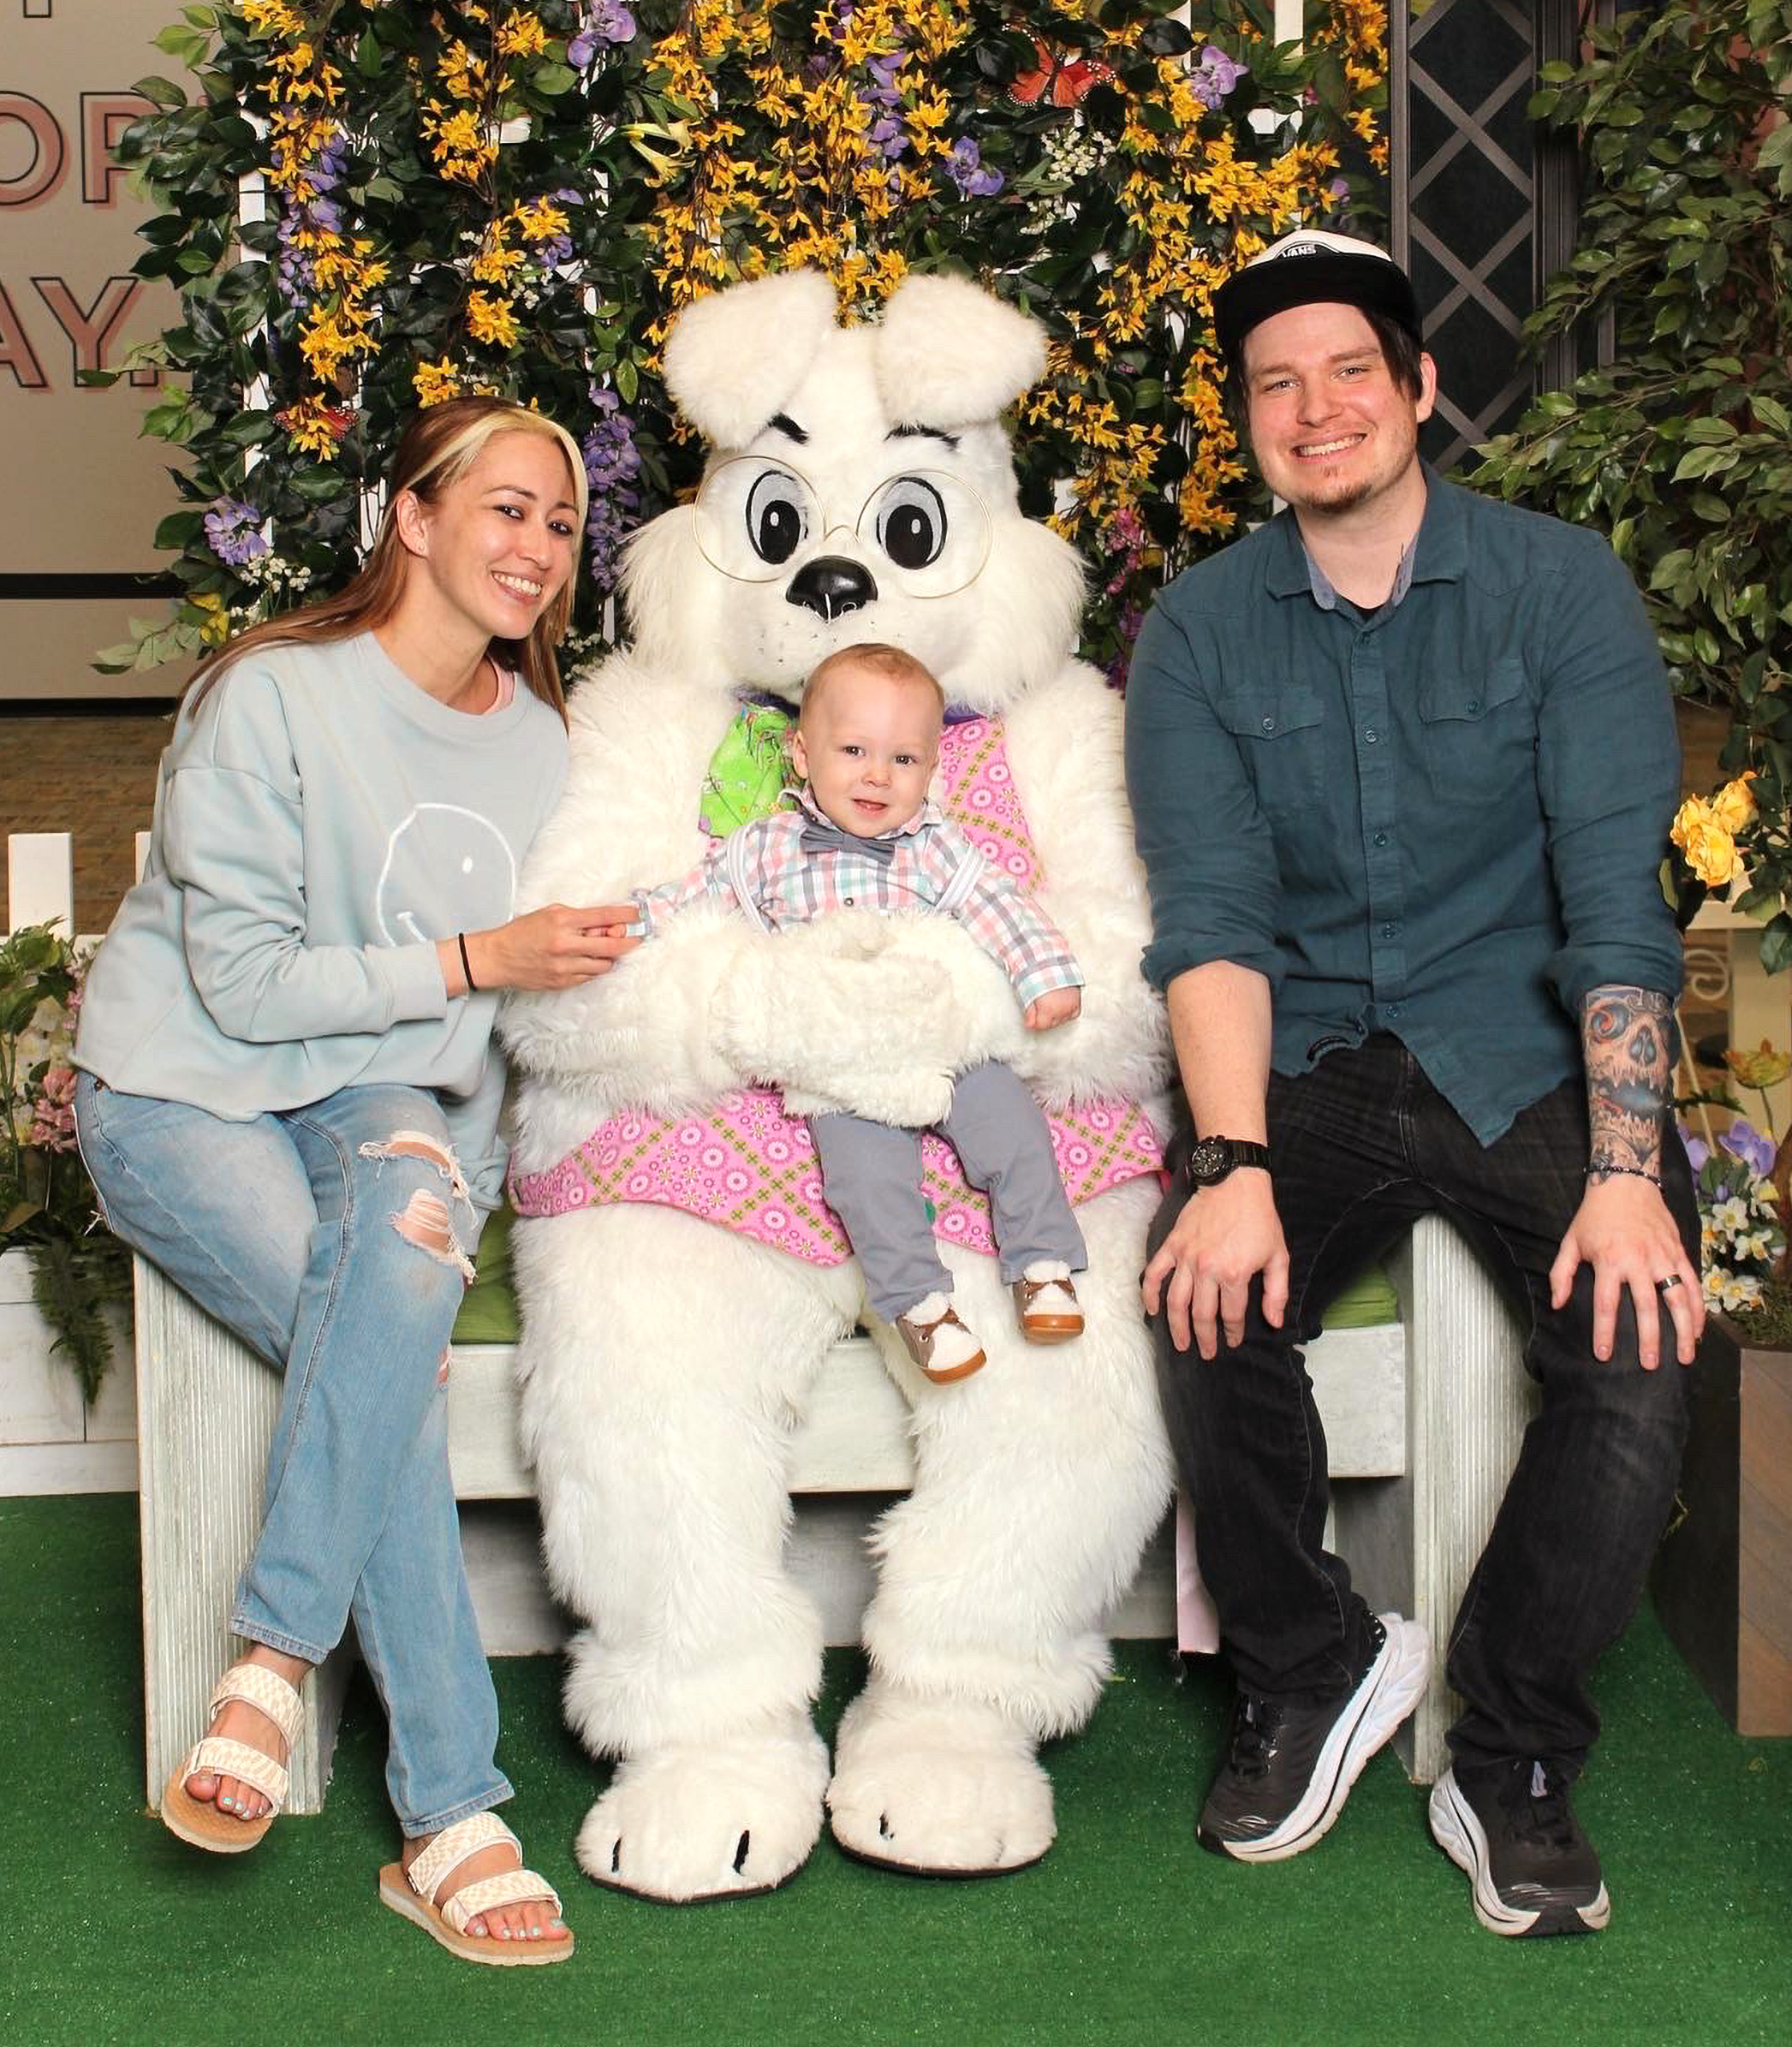 Nick Rickenbach and family with easter bunny